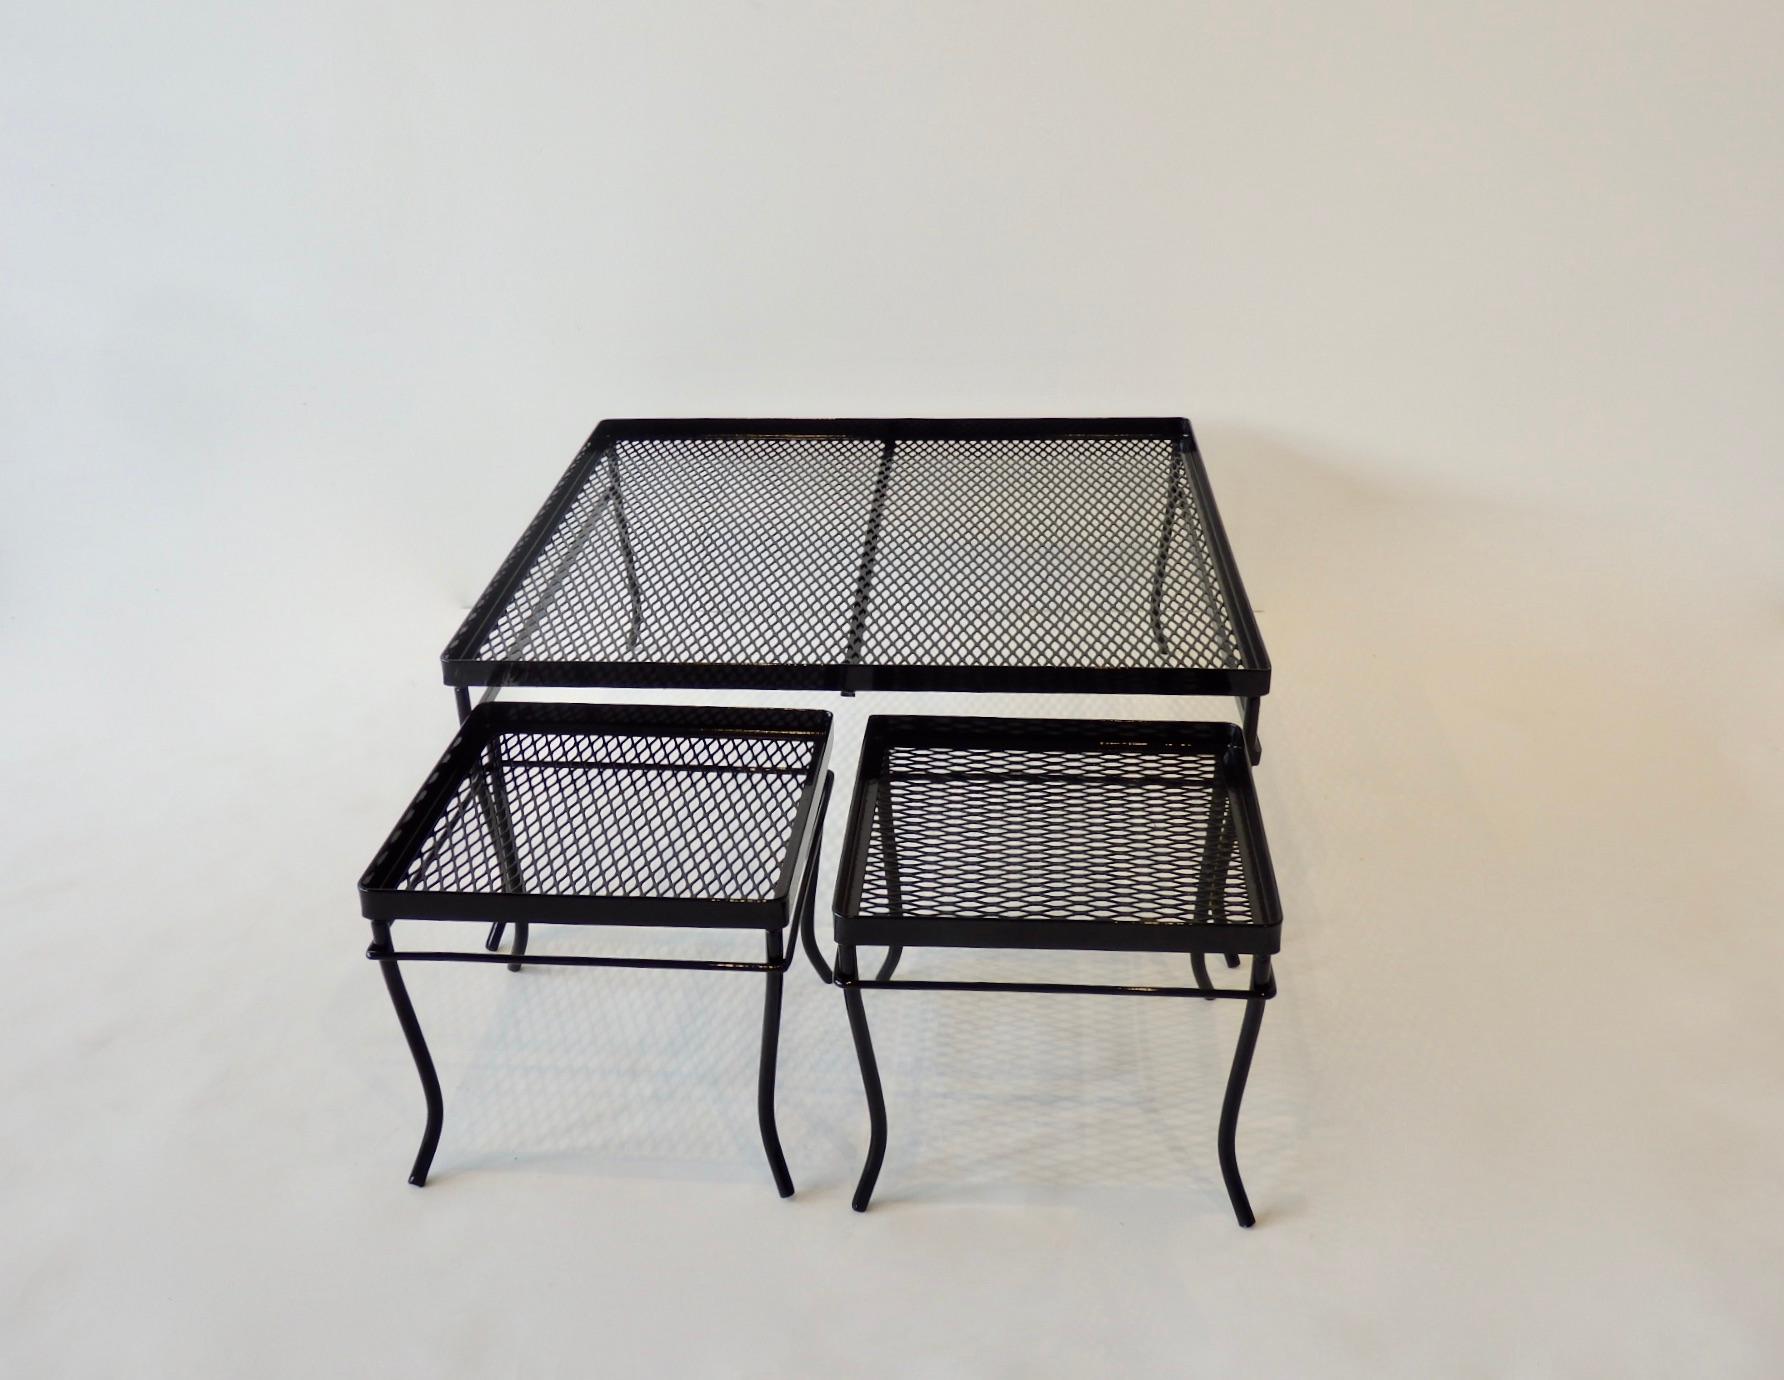 Restored in gloss black powder coat large square Woodard cocktail table. Two smaller tables fit underneath or sit on top. Large table measures 28.5 